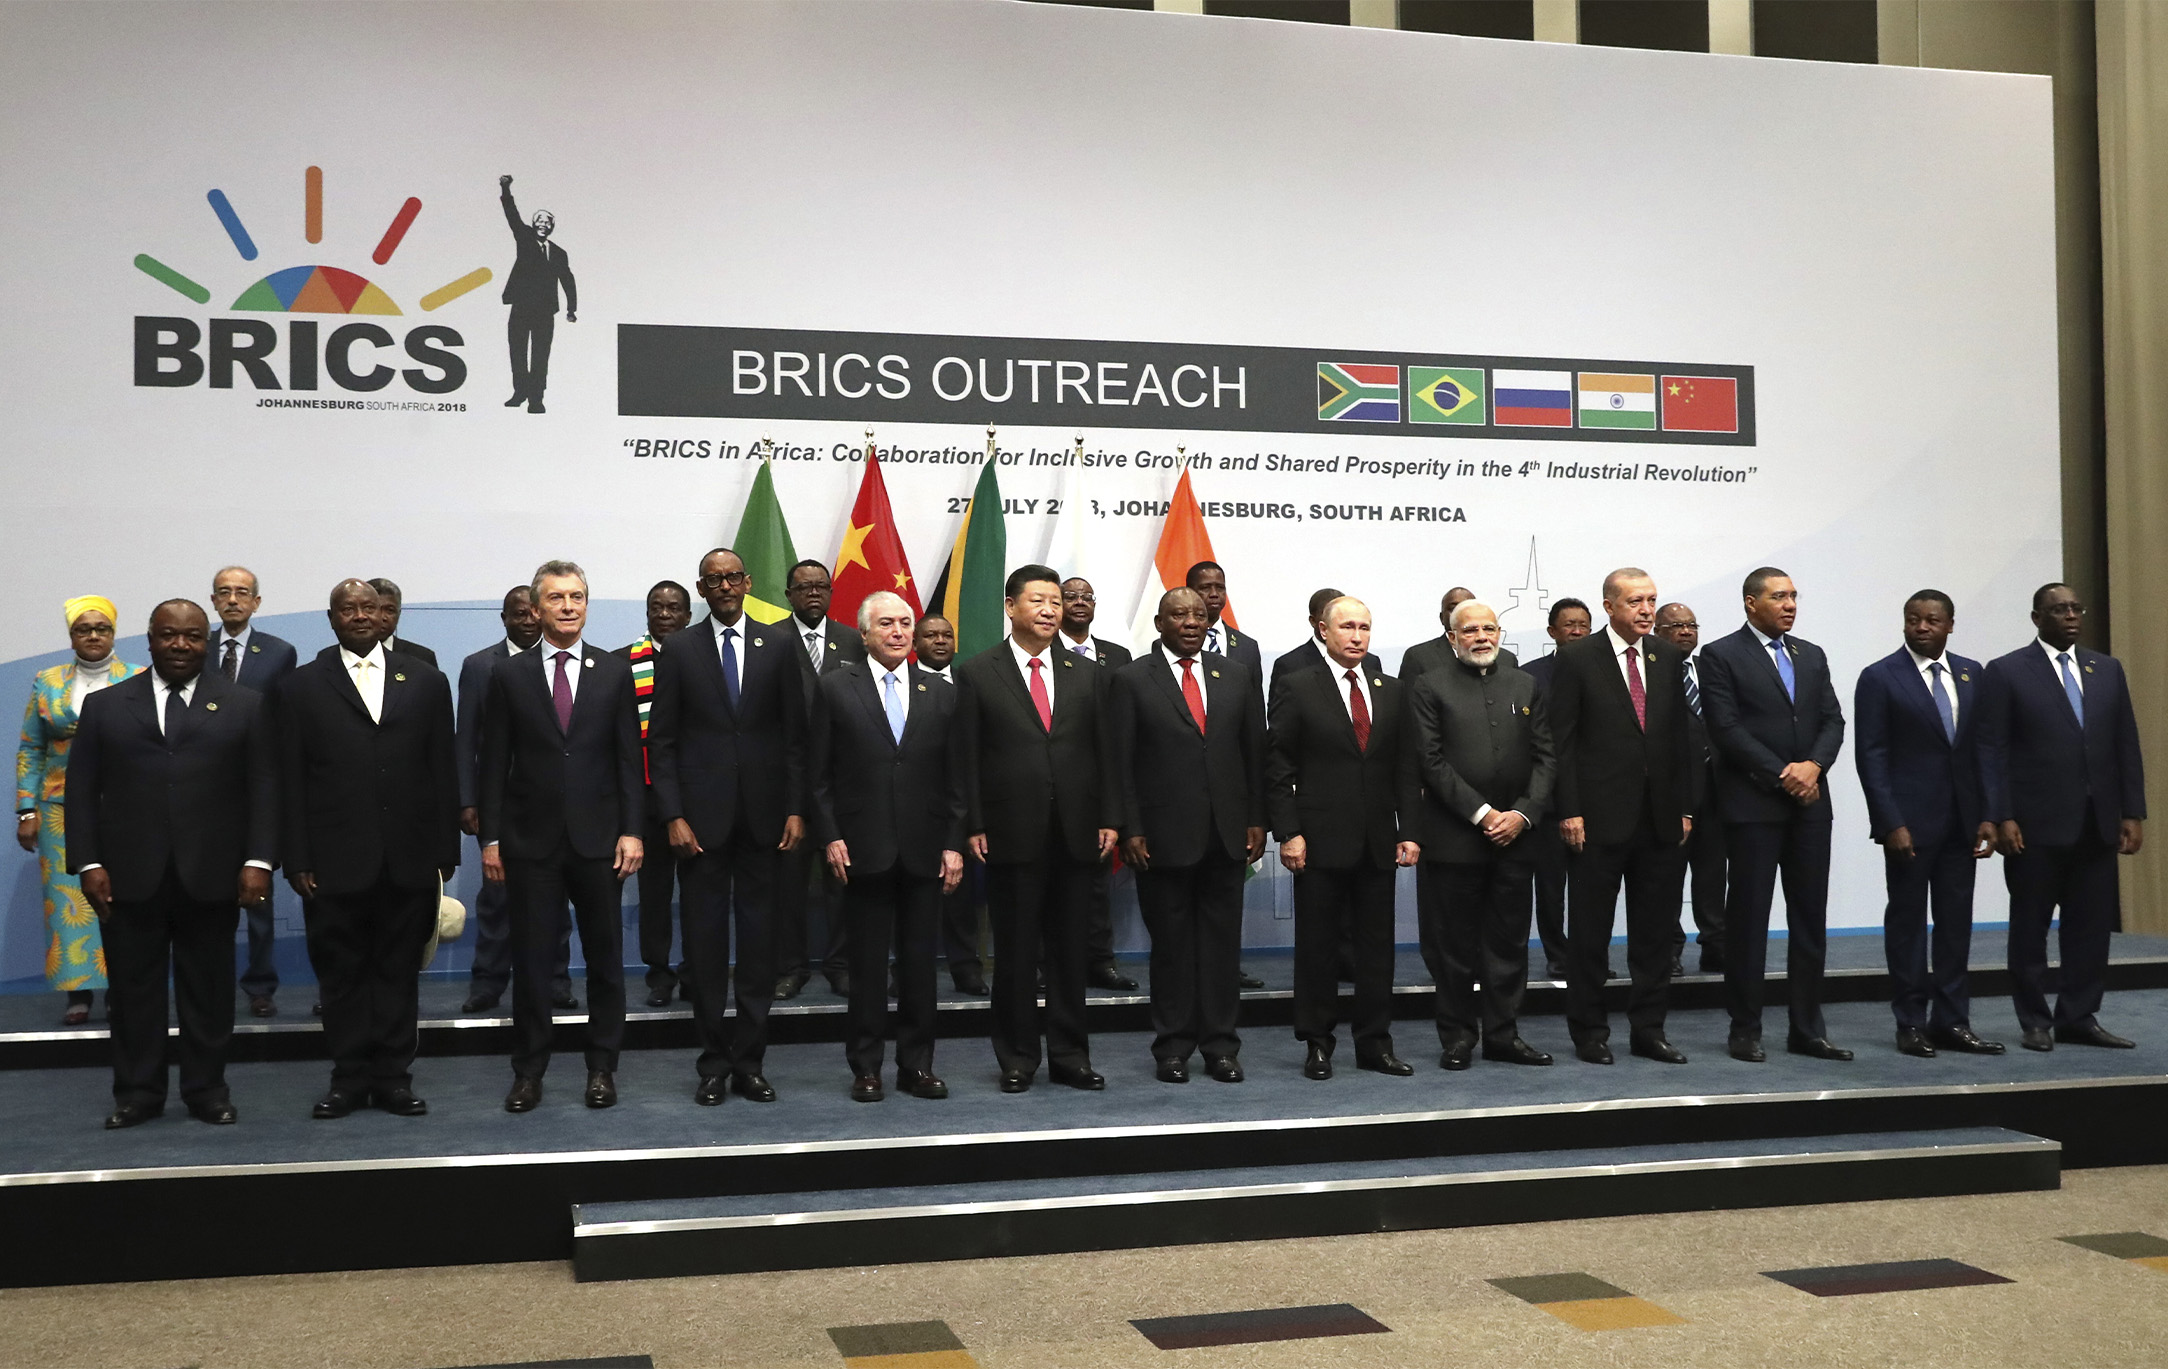 President Macri at 10th BRICS Summit: “We are taking the G20 presidency forward with a vision from the South, aiming to transmit the voice of a whole region”